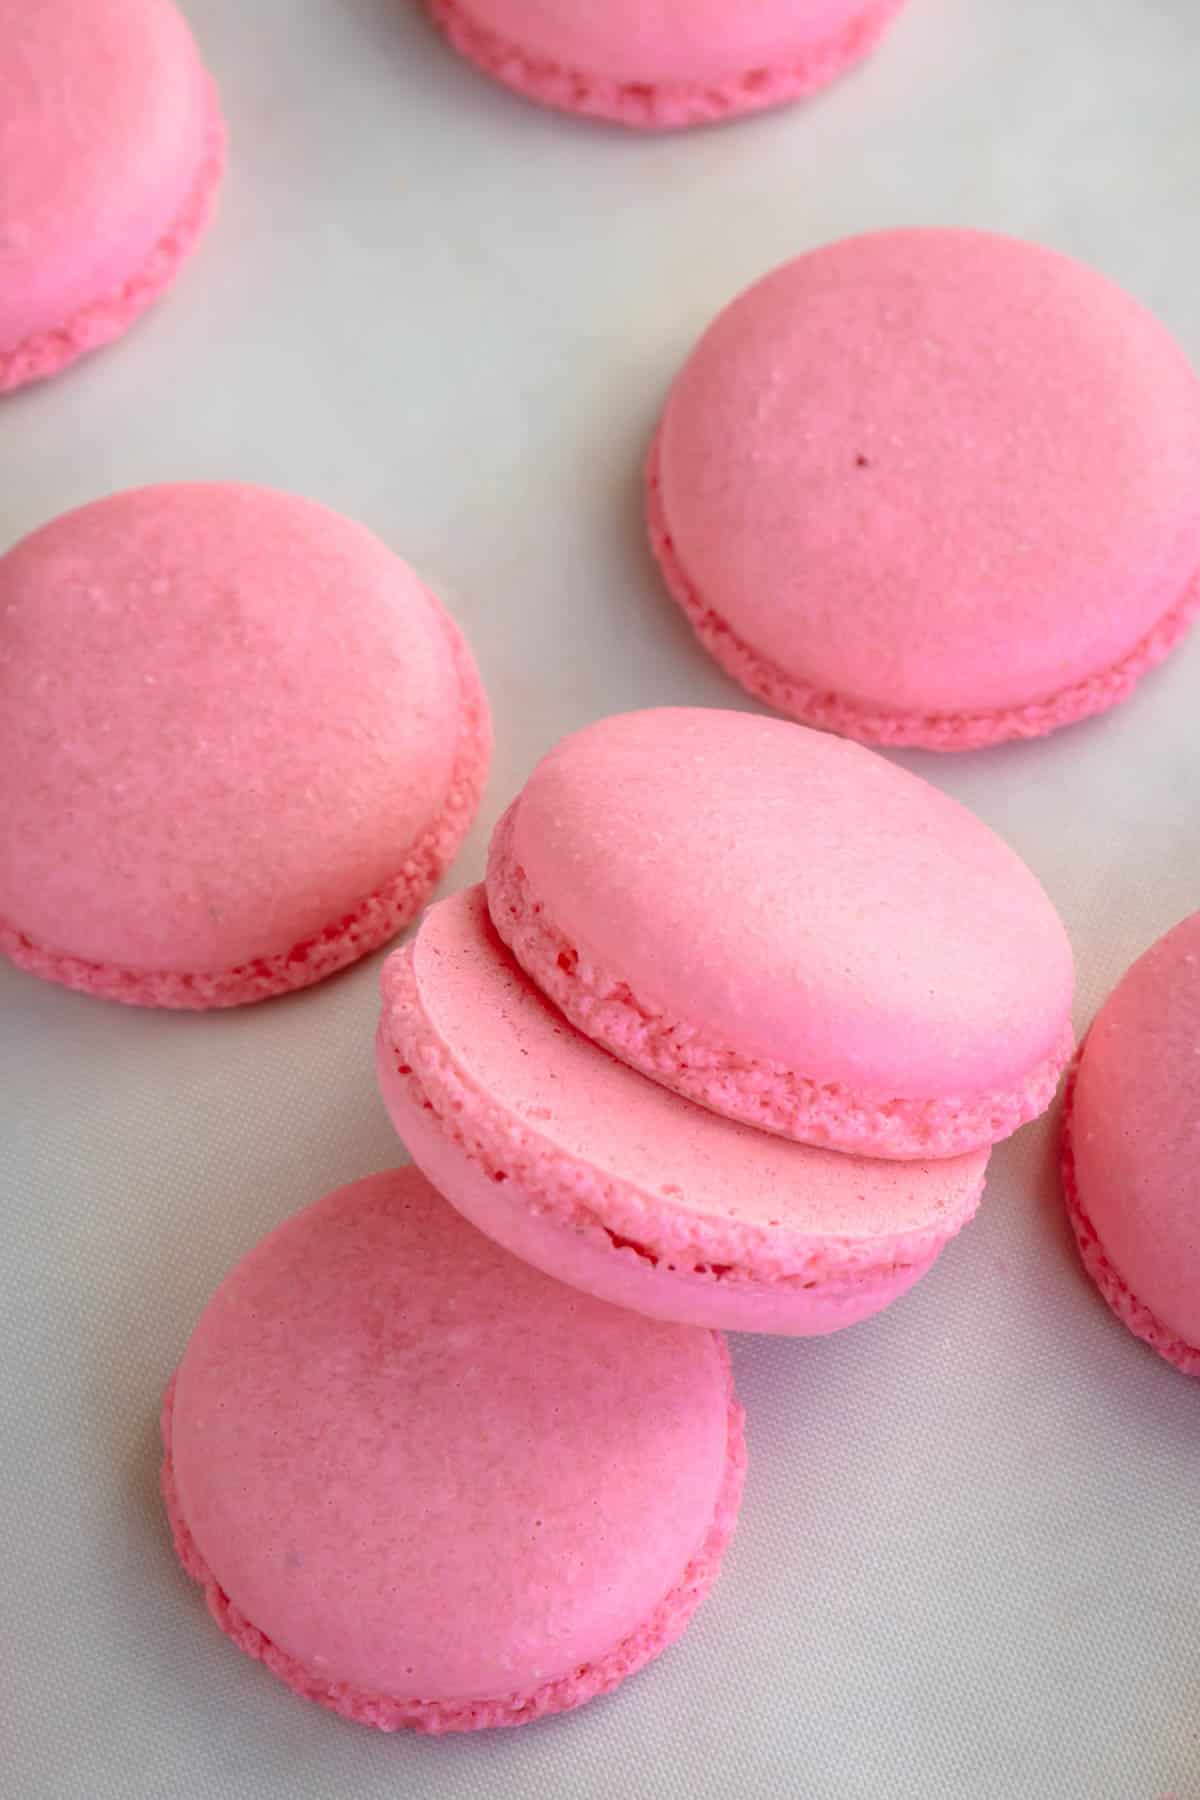 Pink macaron shells on a white surface.